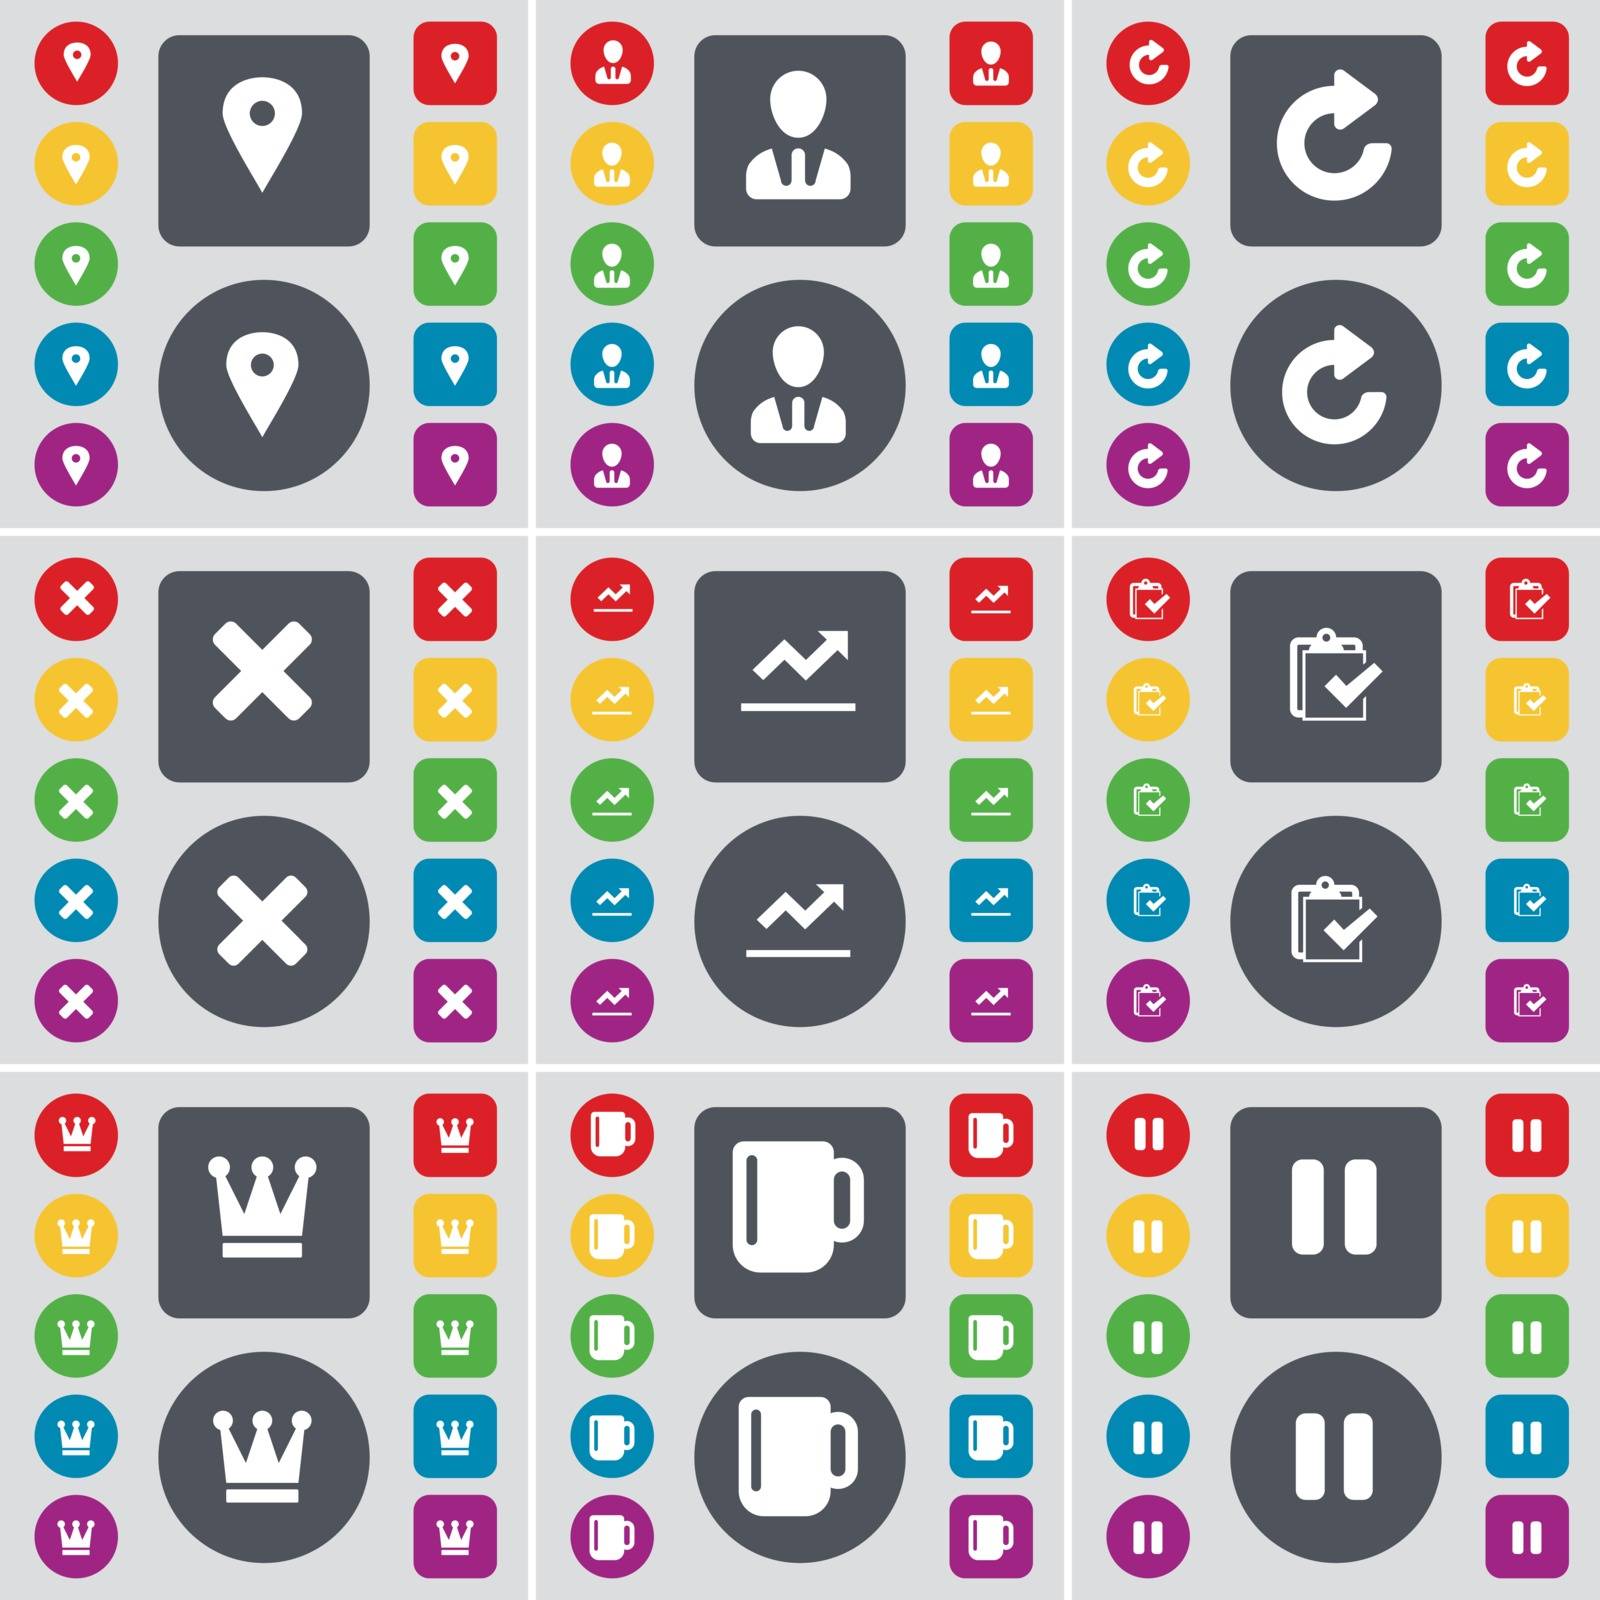 Checkpoint, Avatar, Reload, Stop, Graph file, Survey, Crown, Cup, Pause icon symbol. A large set of flat, colored buttons for your design. Vector illustration